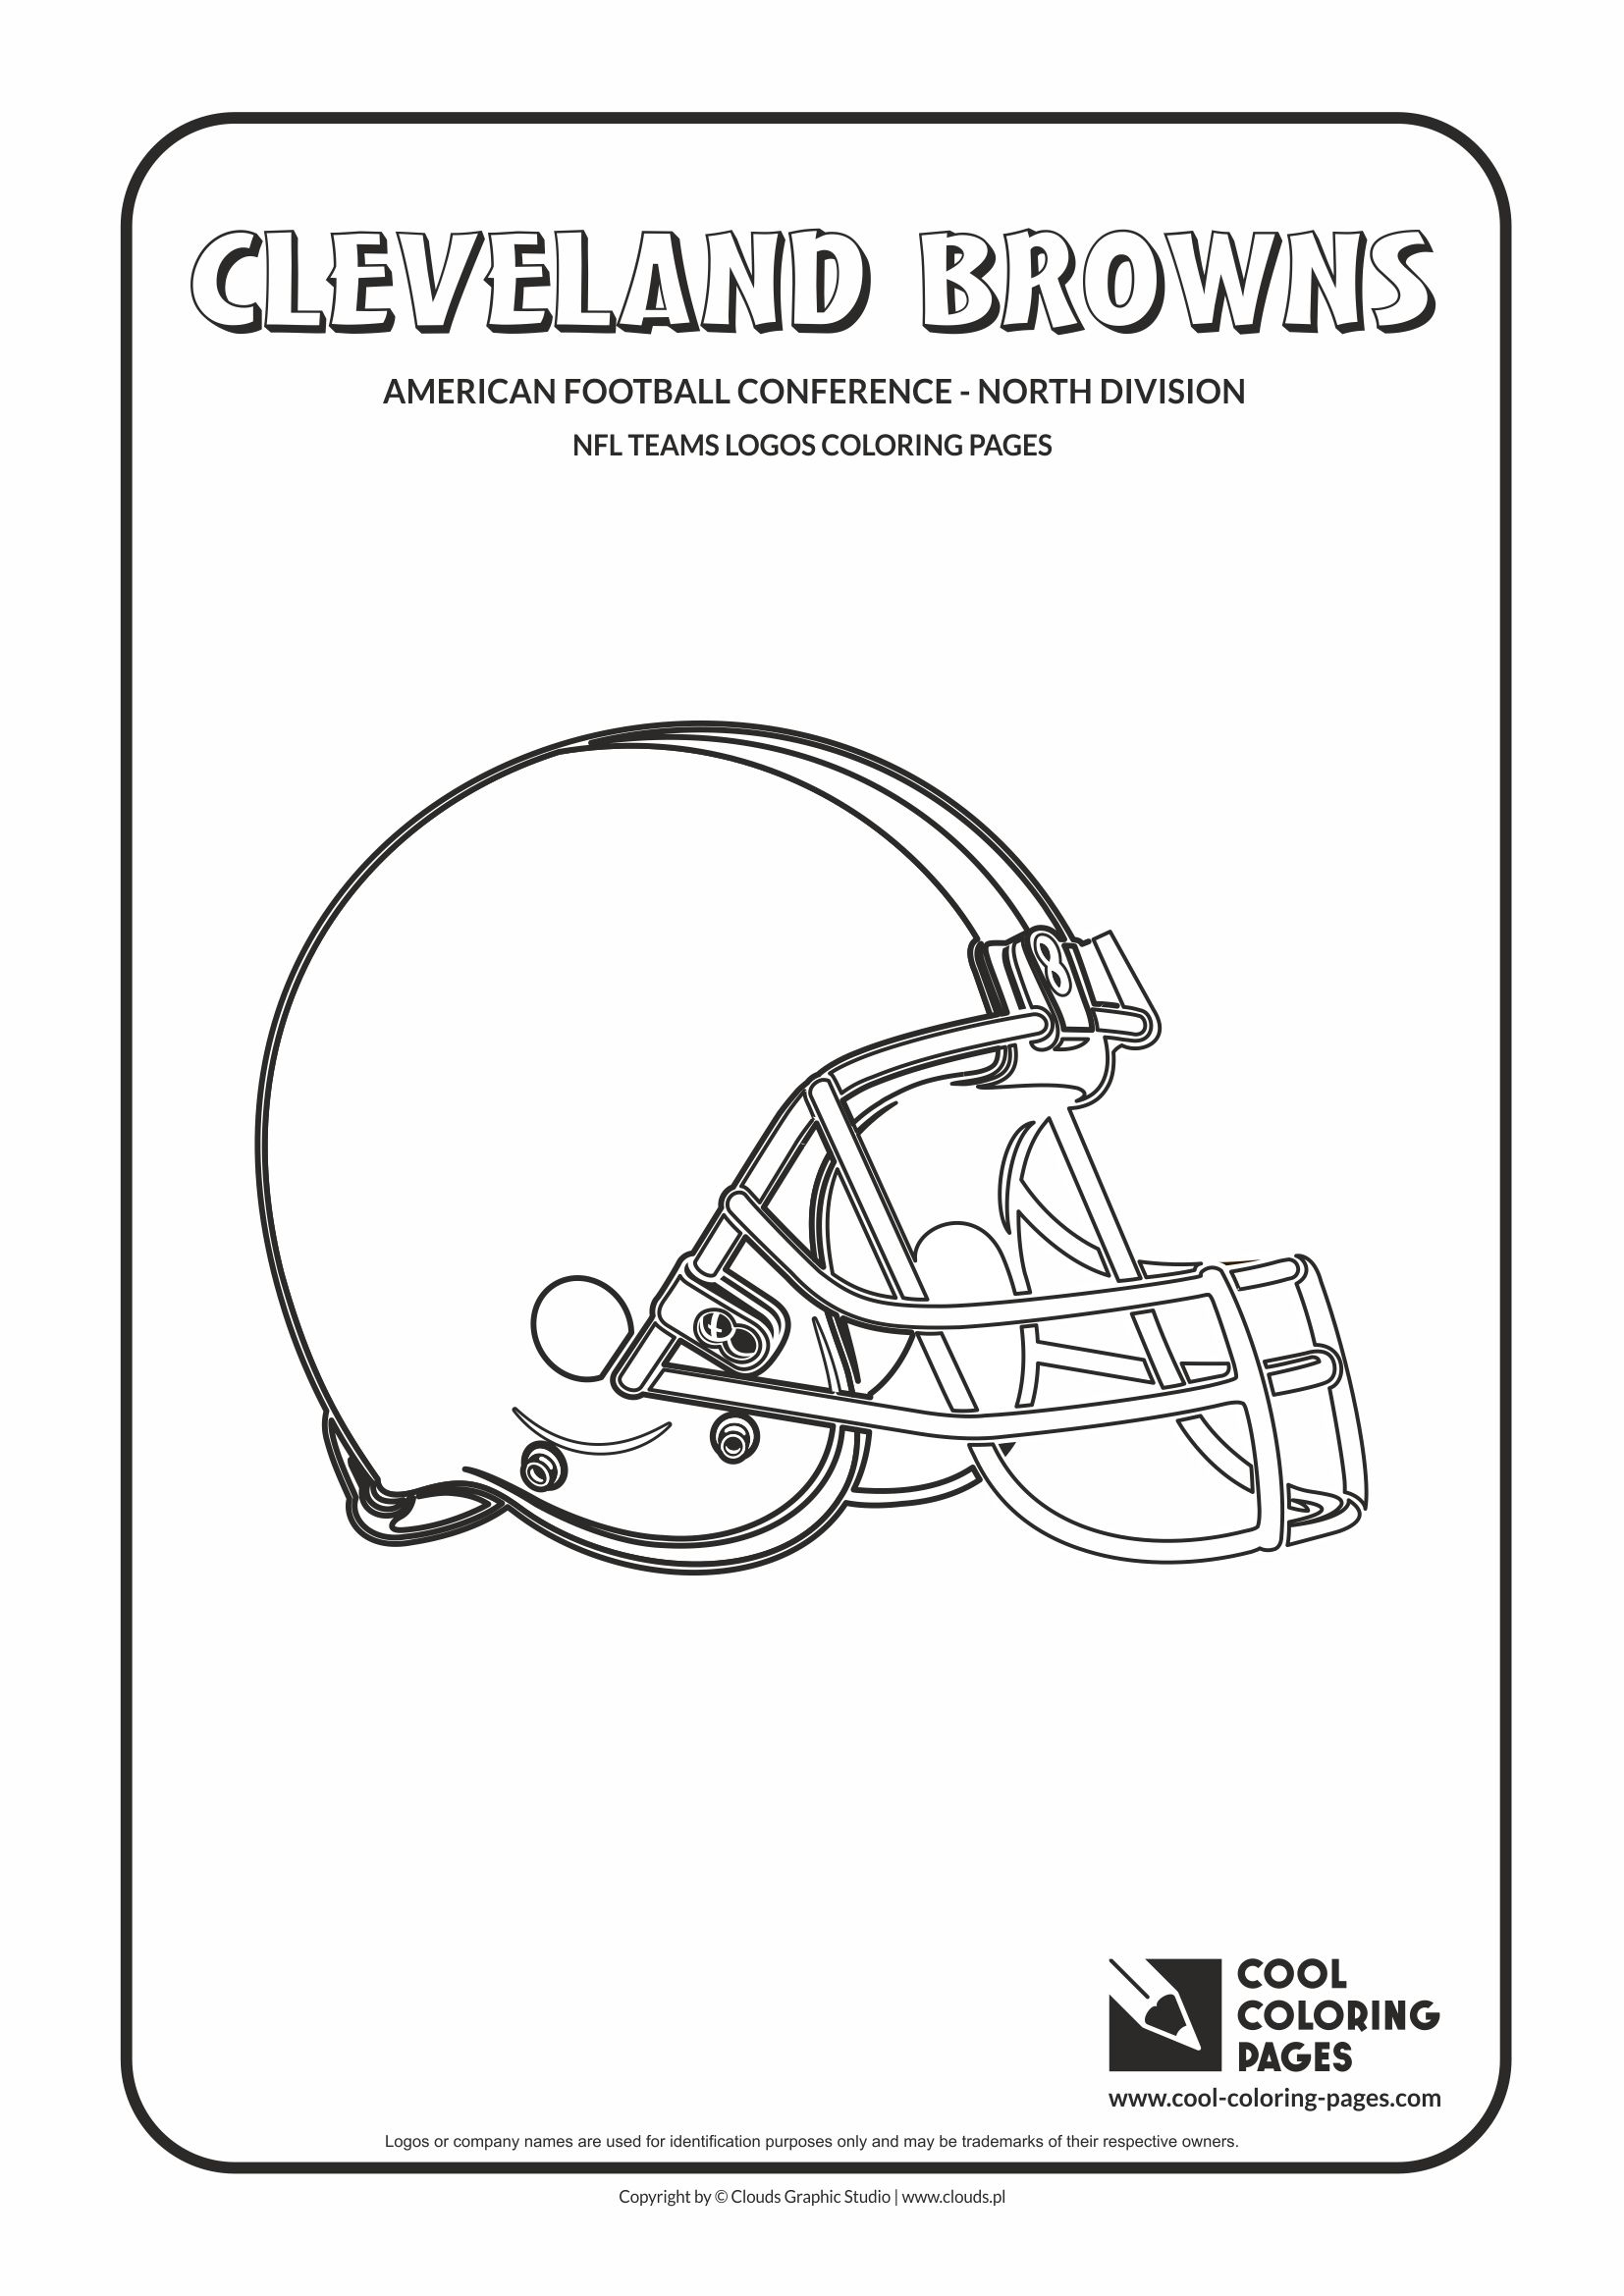 Cool Coloring Pages Cleveland Browns - NFL American football teams ...